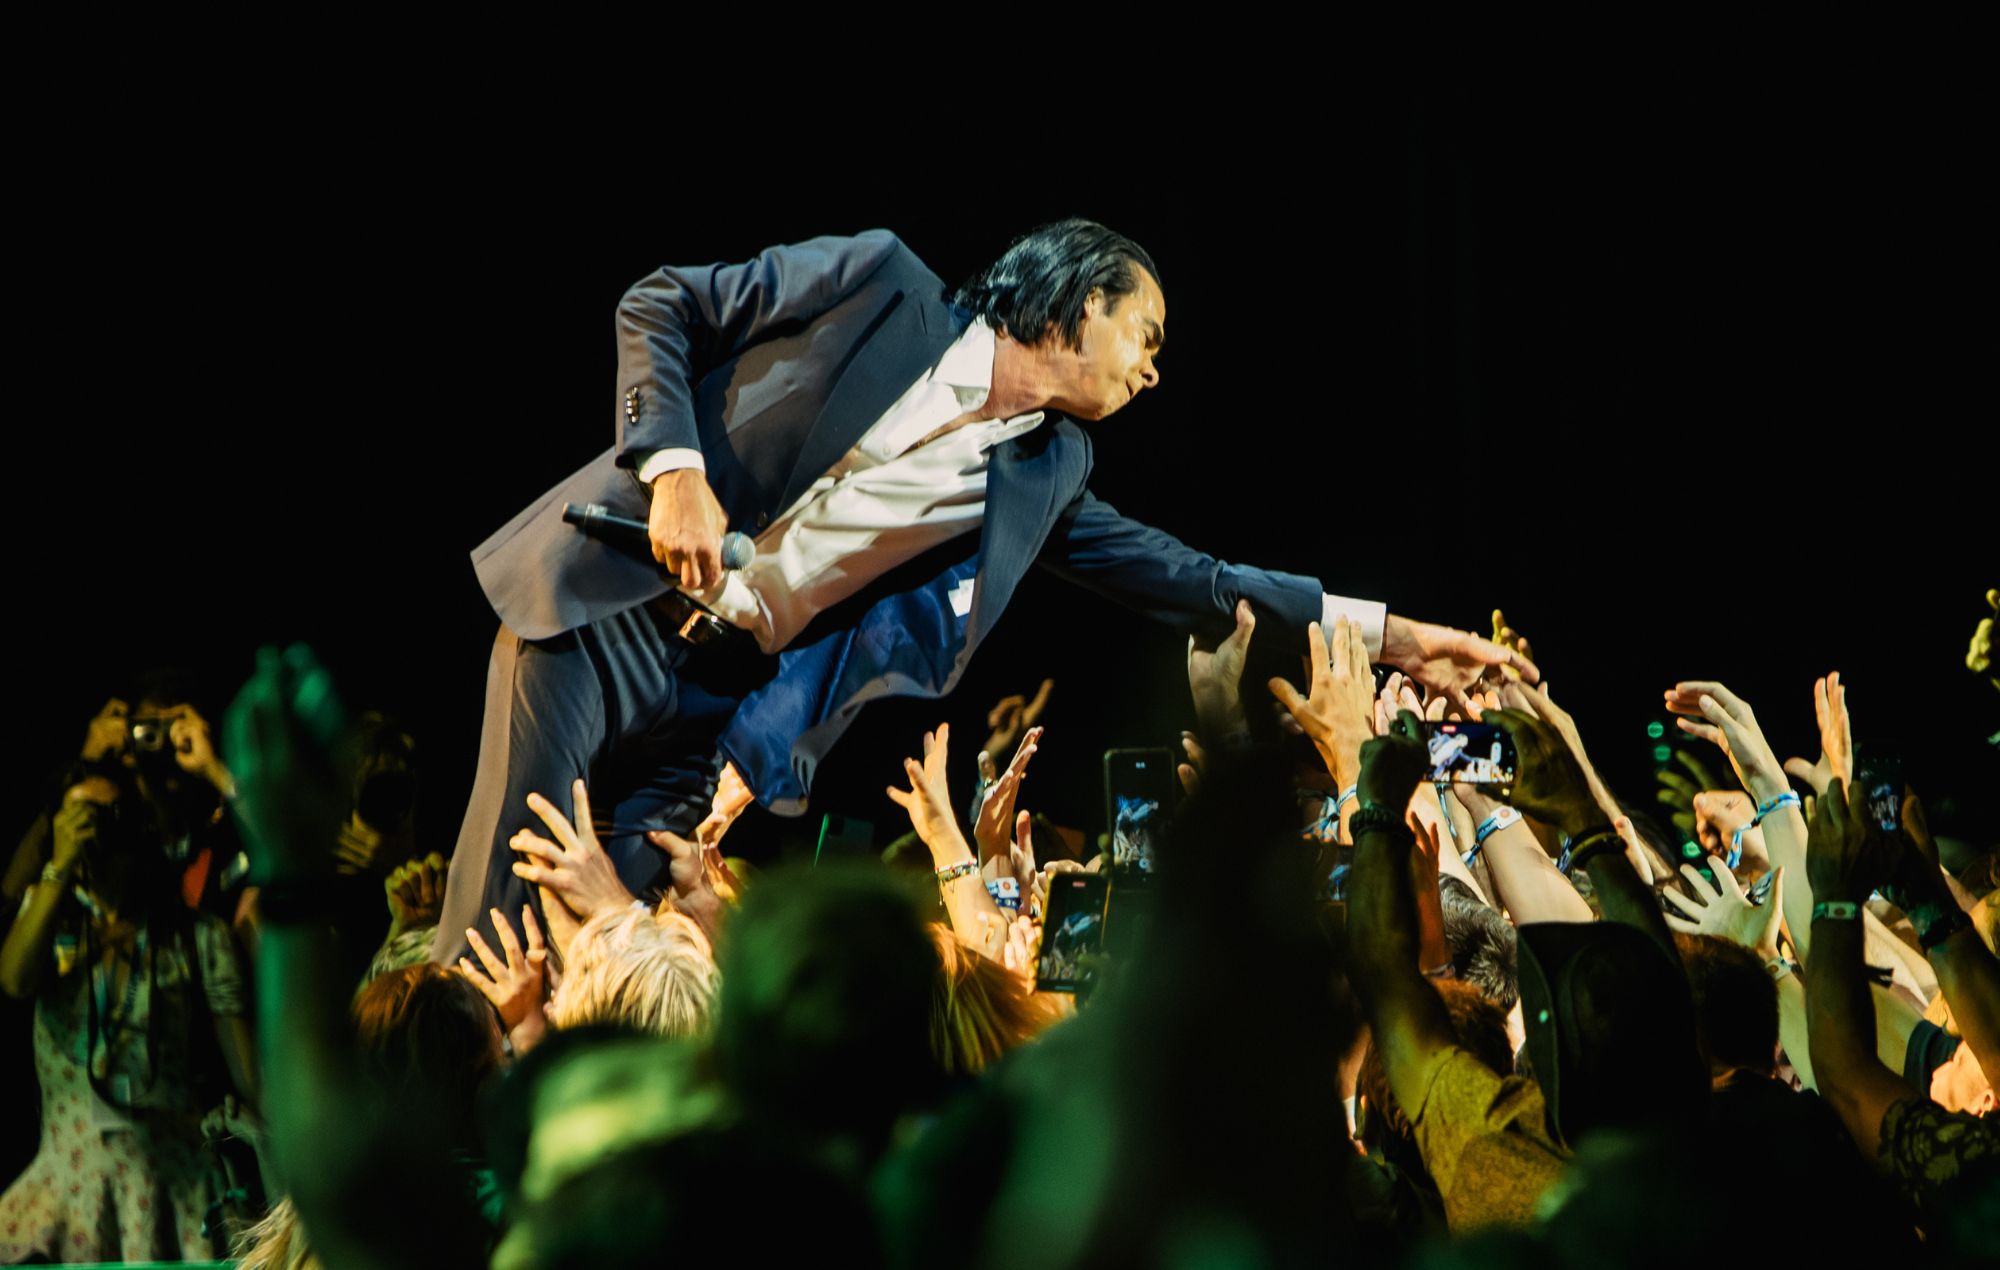 Nick Cave shares advice for artist considering boycotting The Great Escape in solidarity with Palestine: “Play”